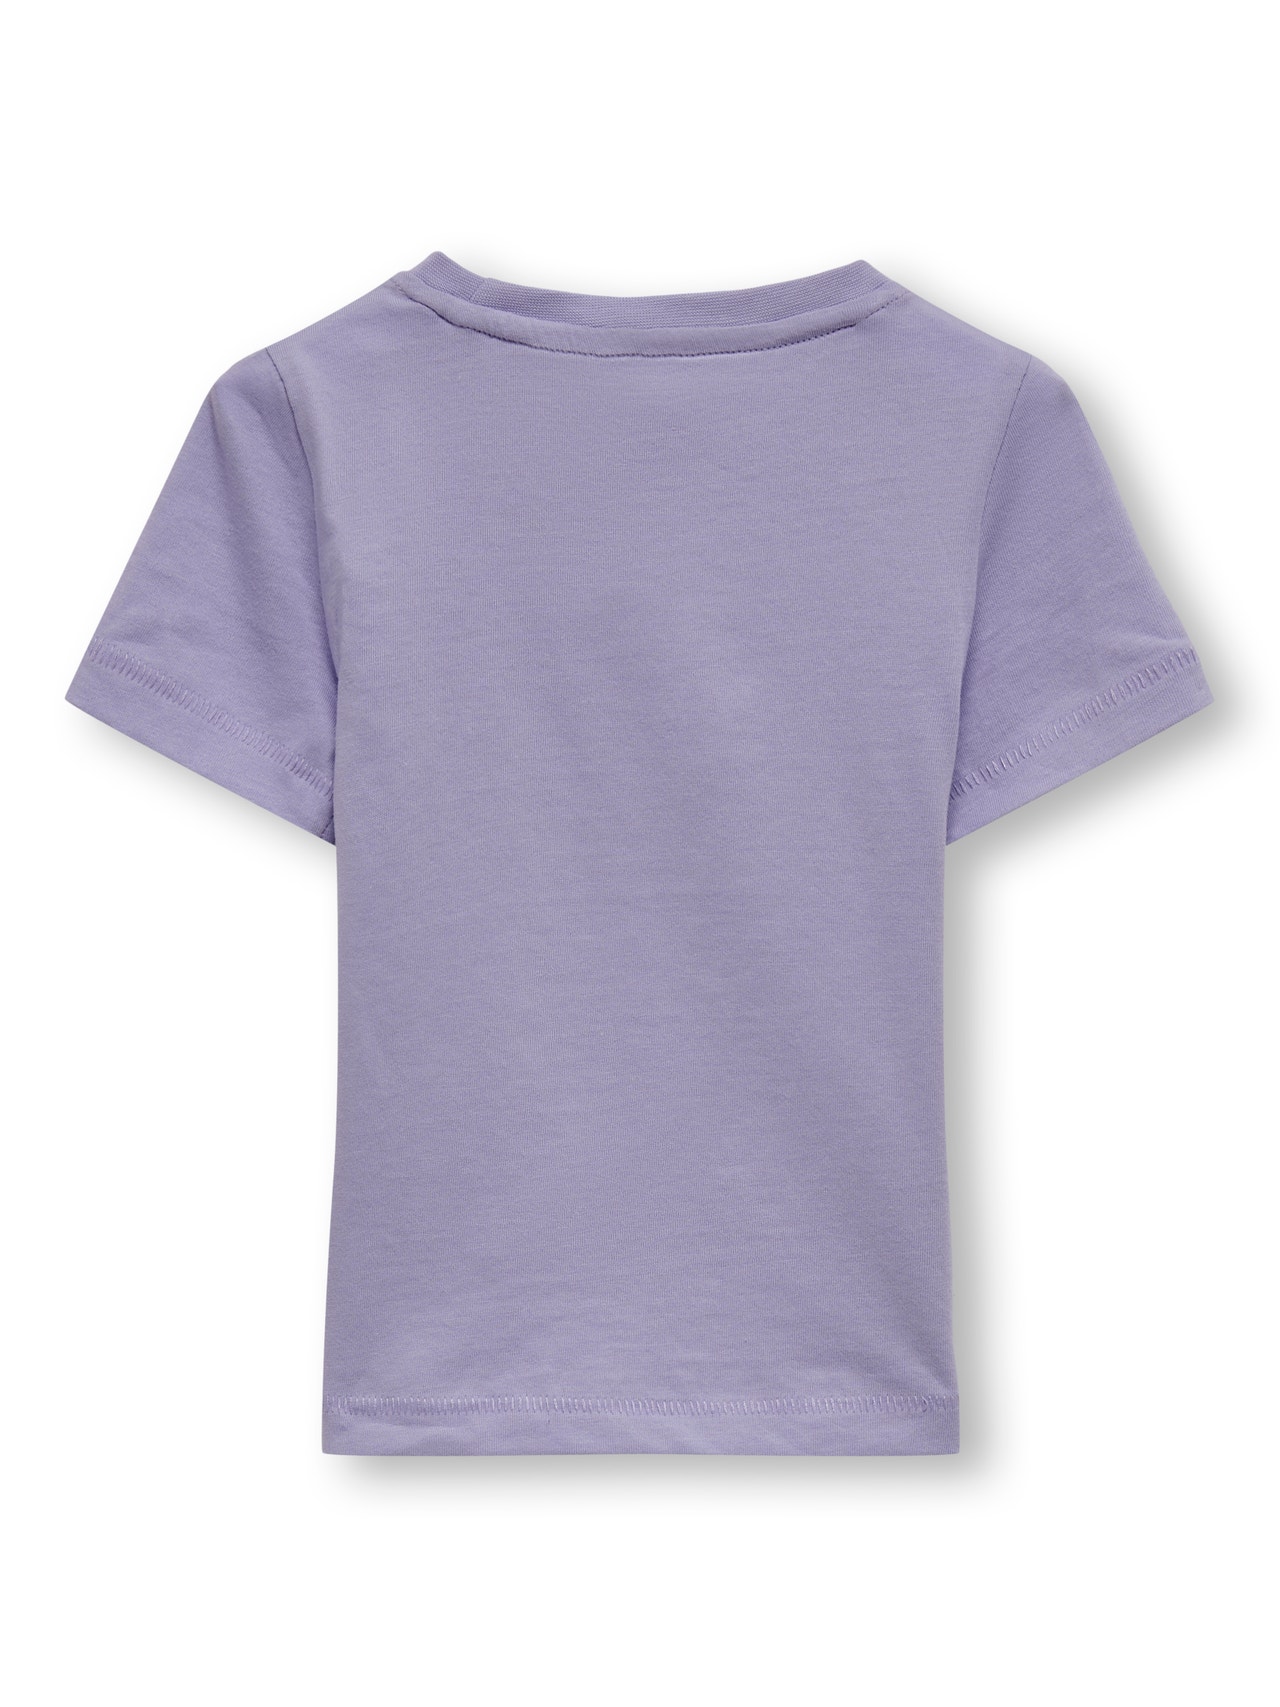 ONLY Mini ONLY-logo T-shirt -Purple Rose - 15250807